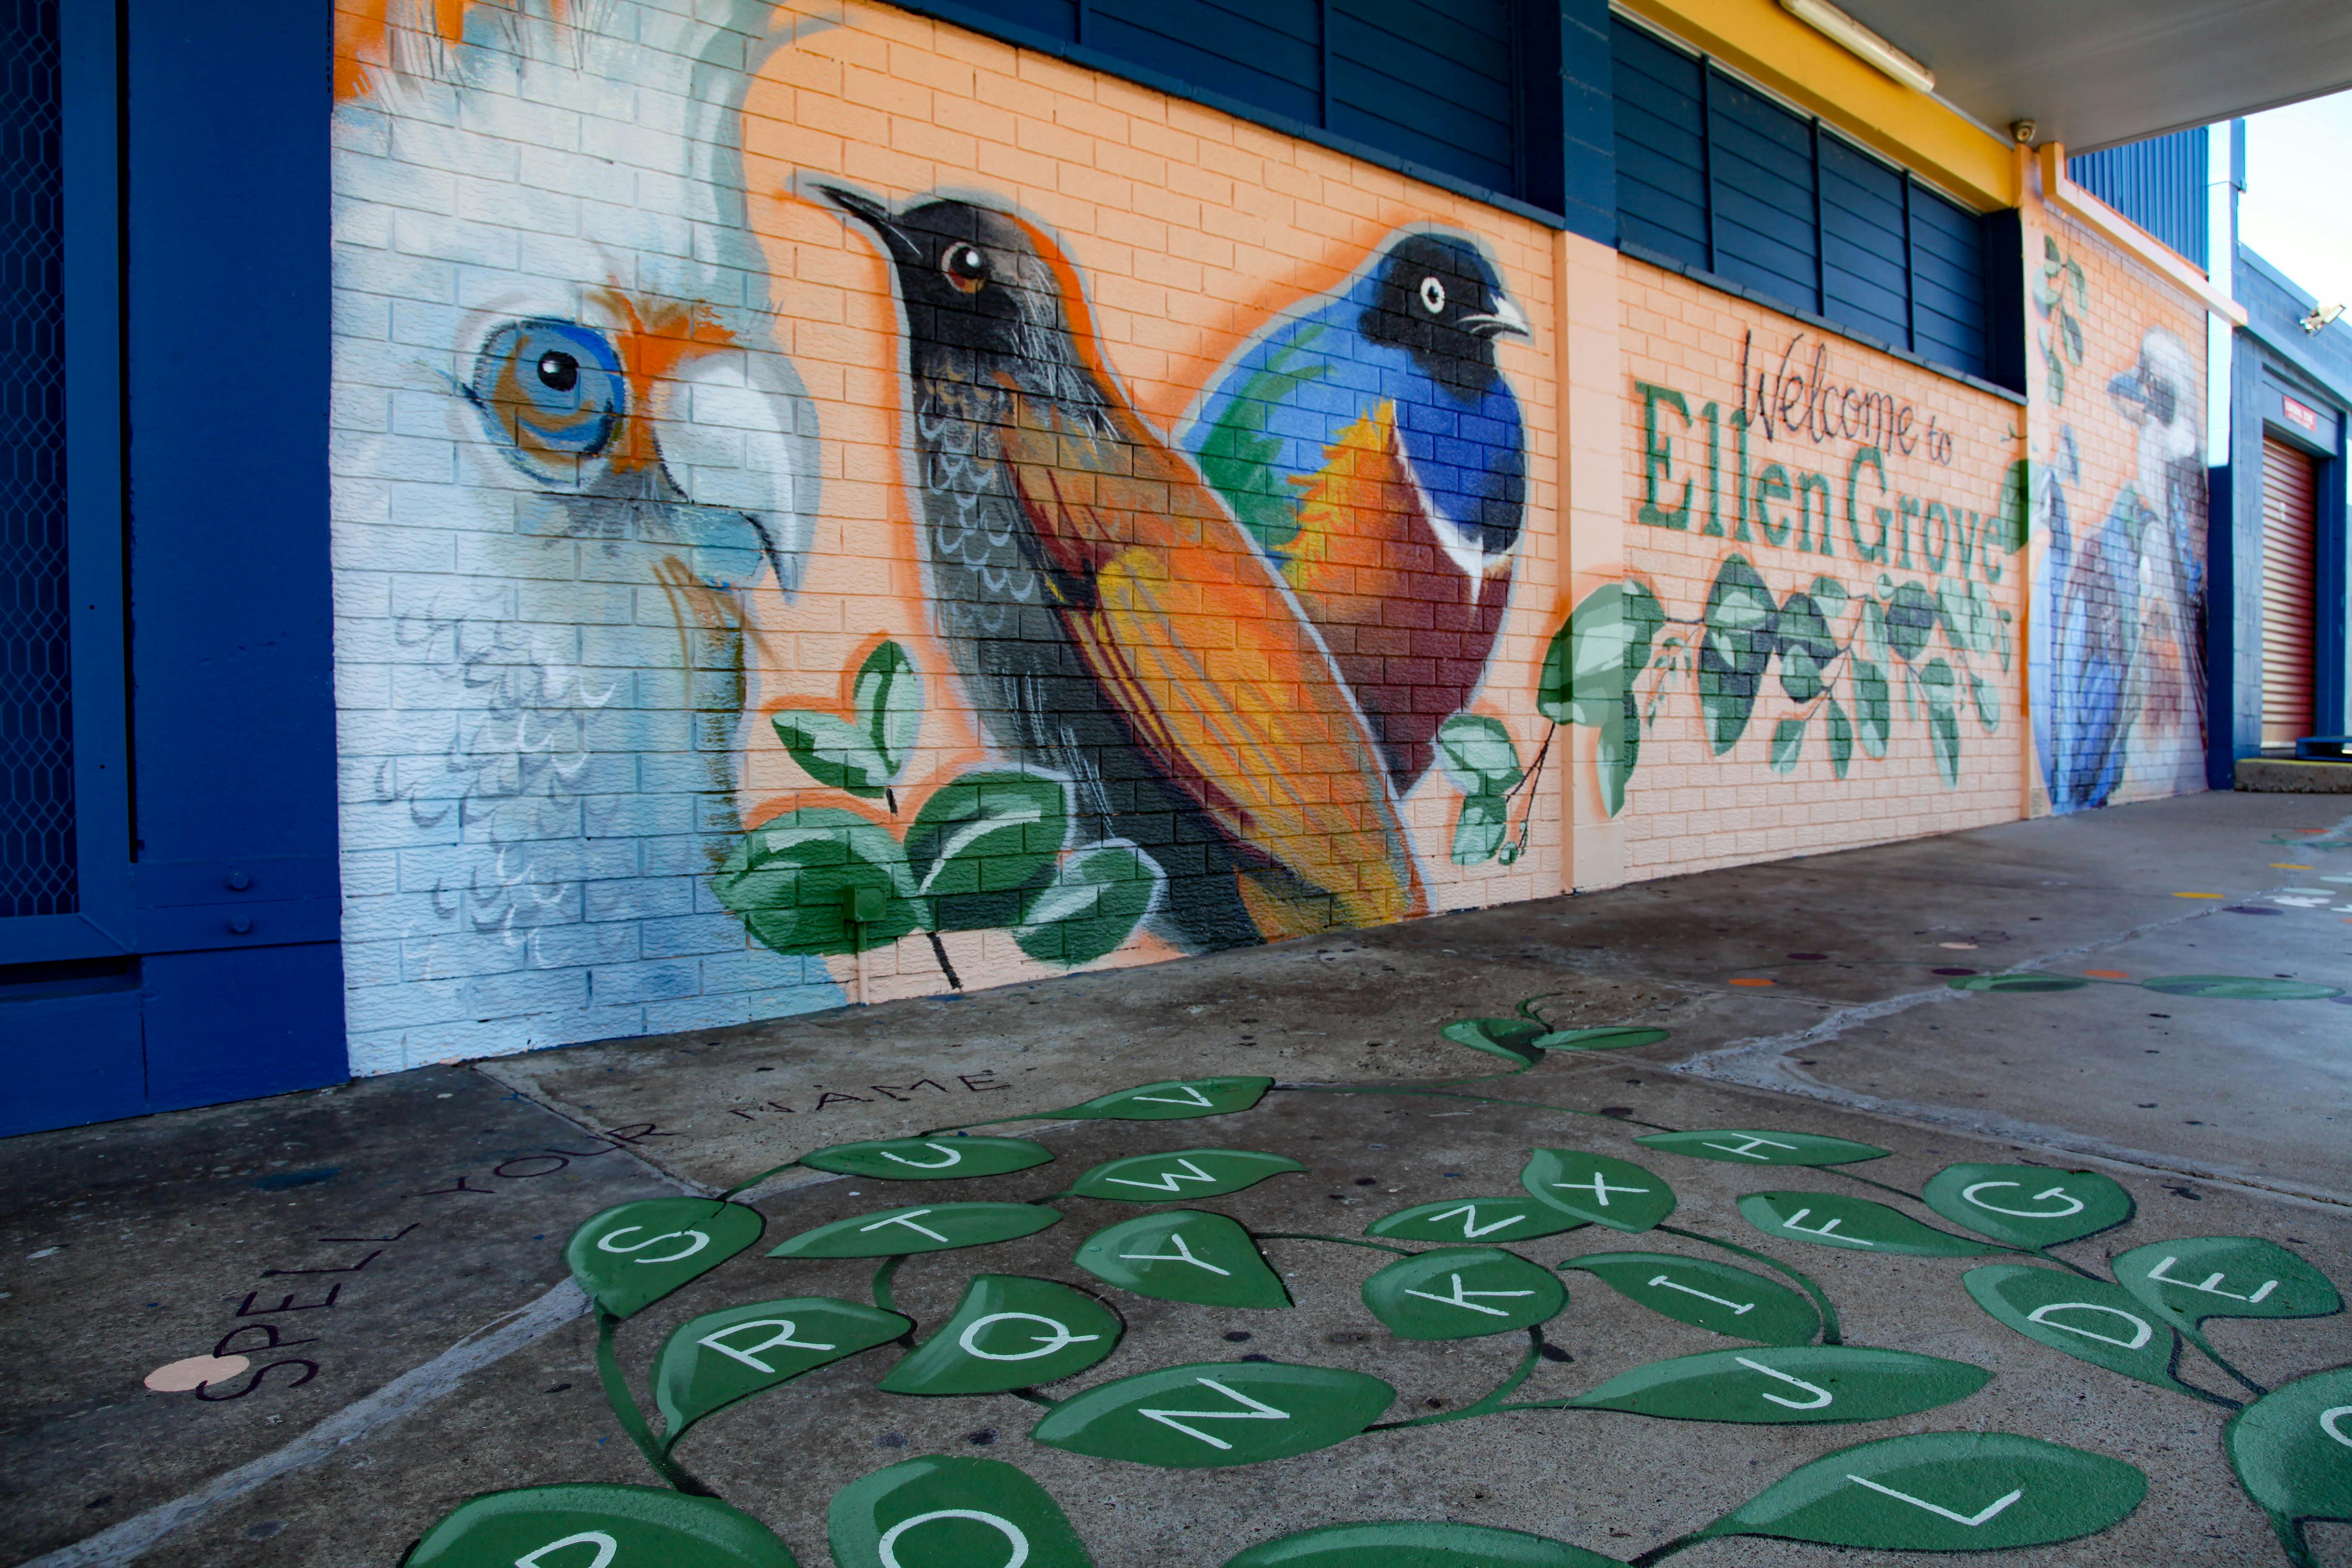 Photo of the 'Welcome to Ellen Grove' mural and ground games